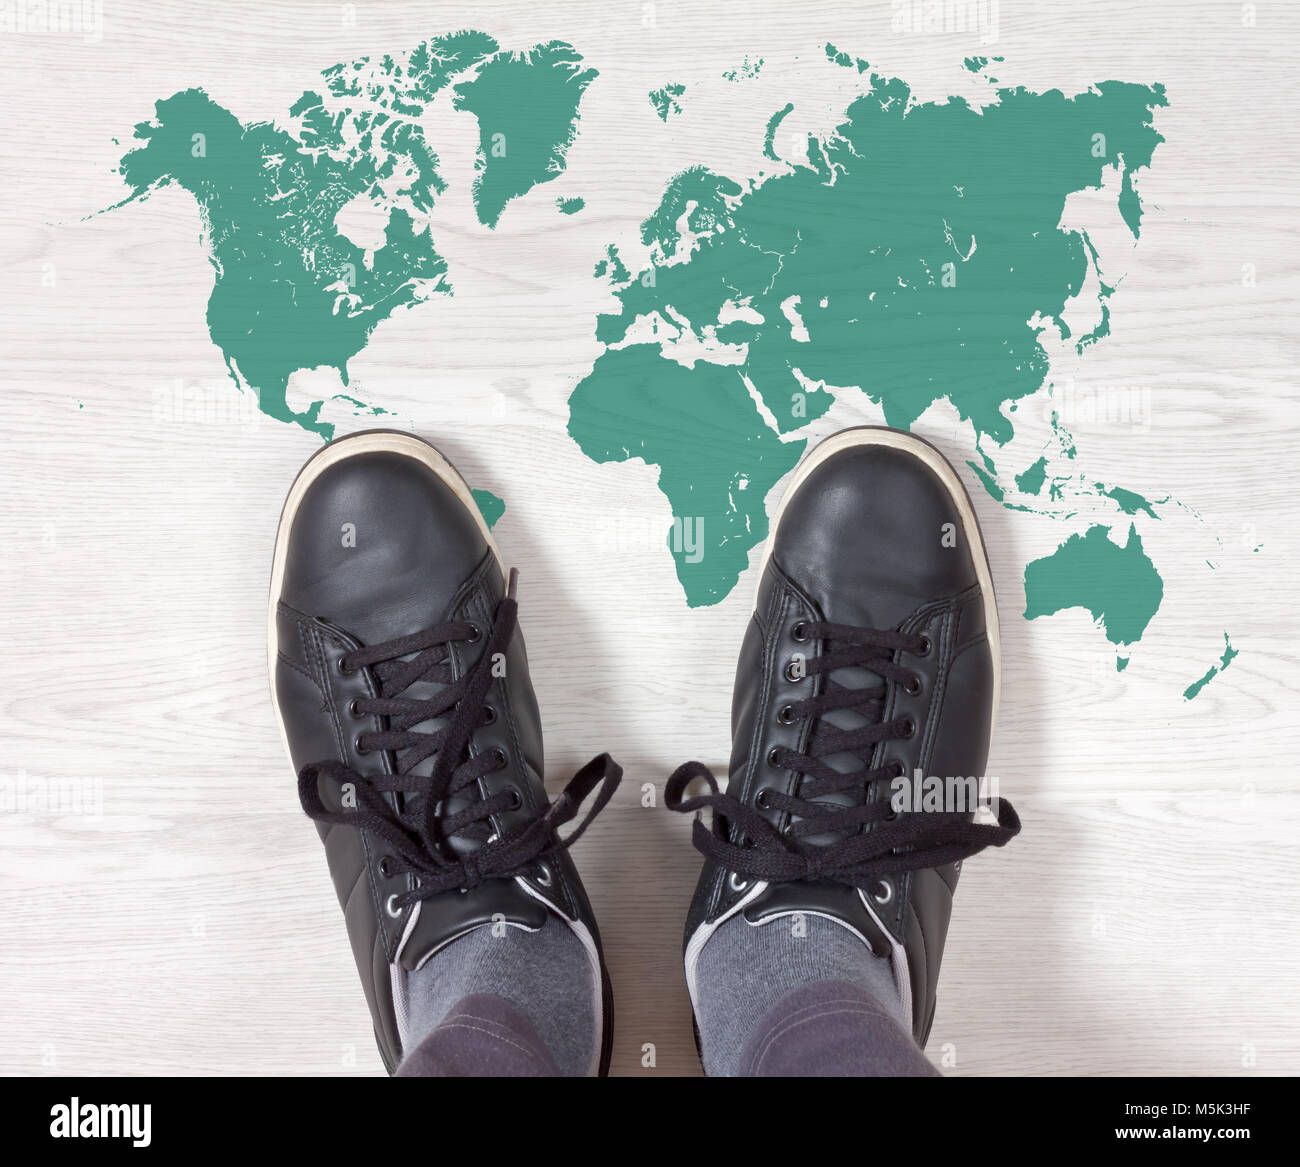 Black sneakers standing on a white wooden floor with a turquoise world map outline painted on it Stock Photo